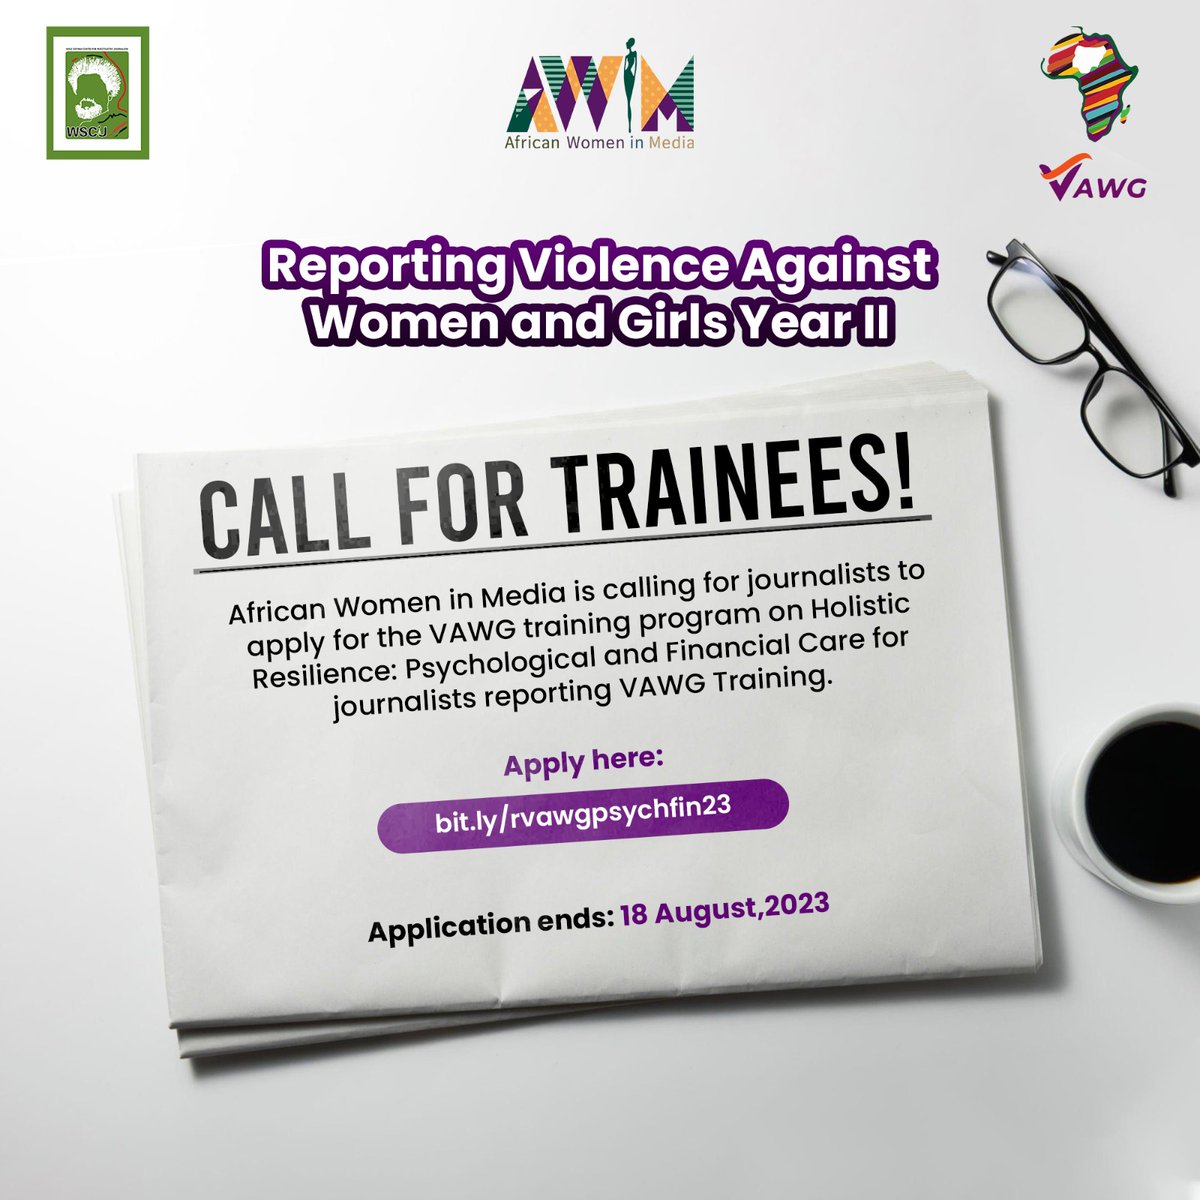 We are now inviting journalists to apply for the VAWG training program on Psychological and Financial Care for journalists reporting VAWG. The training will focus on tools and techniques for psychological and financial resilience, self-care practices, developing and implementing